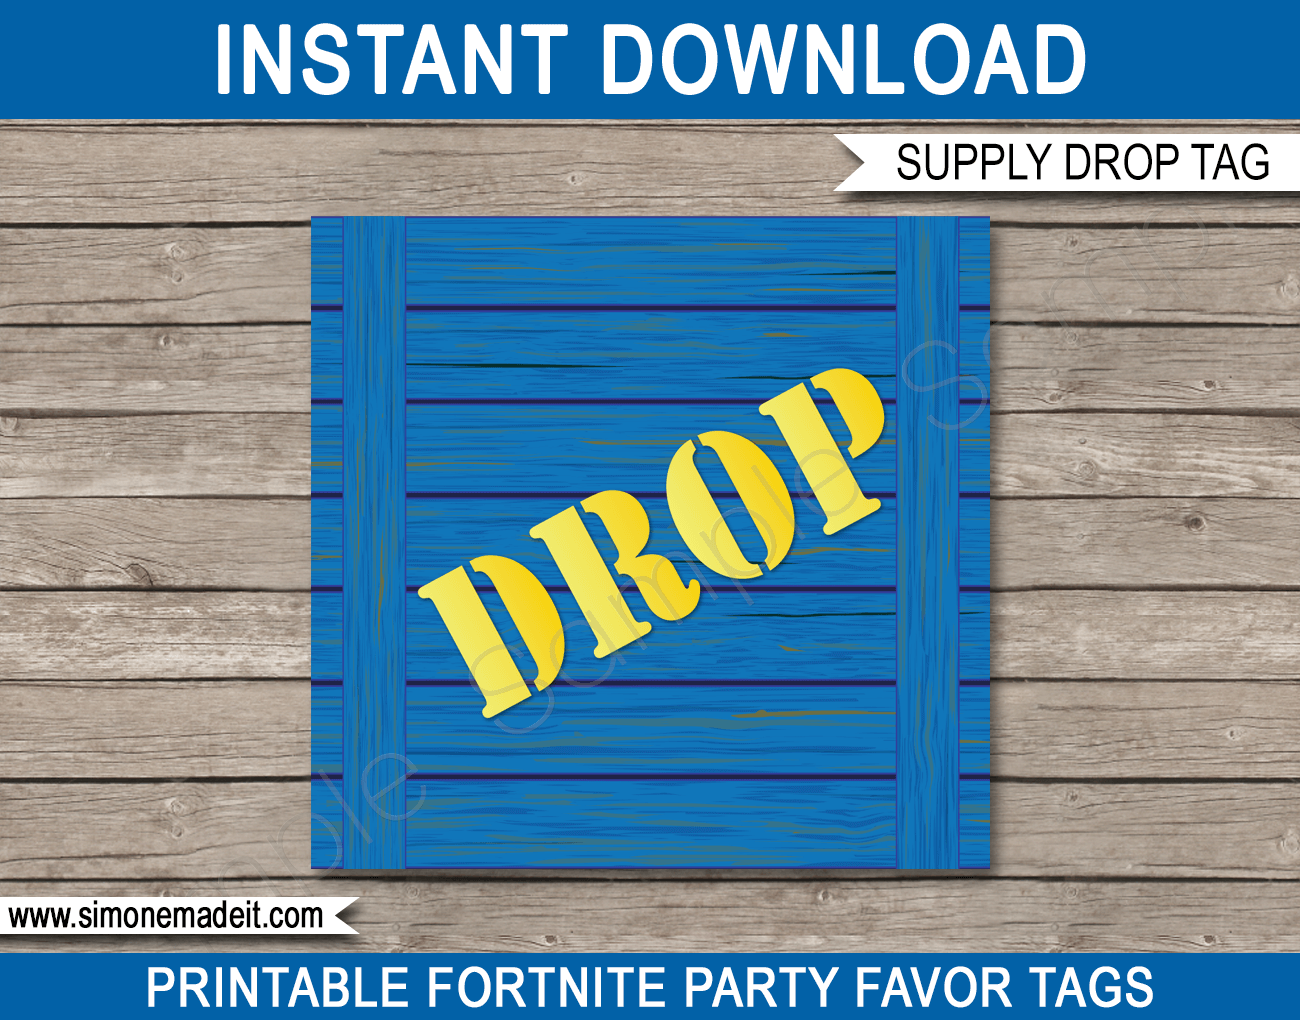 printable-fortnite-supply-drop-party-tags-template-thank-you-favor-tags